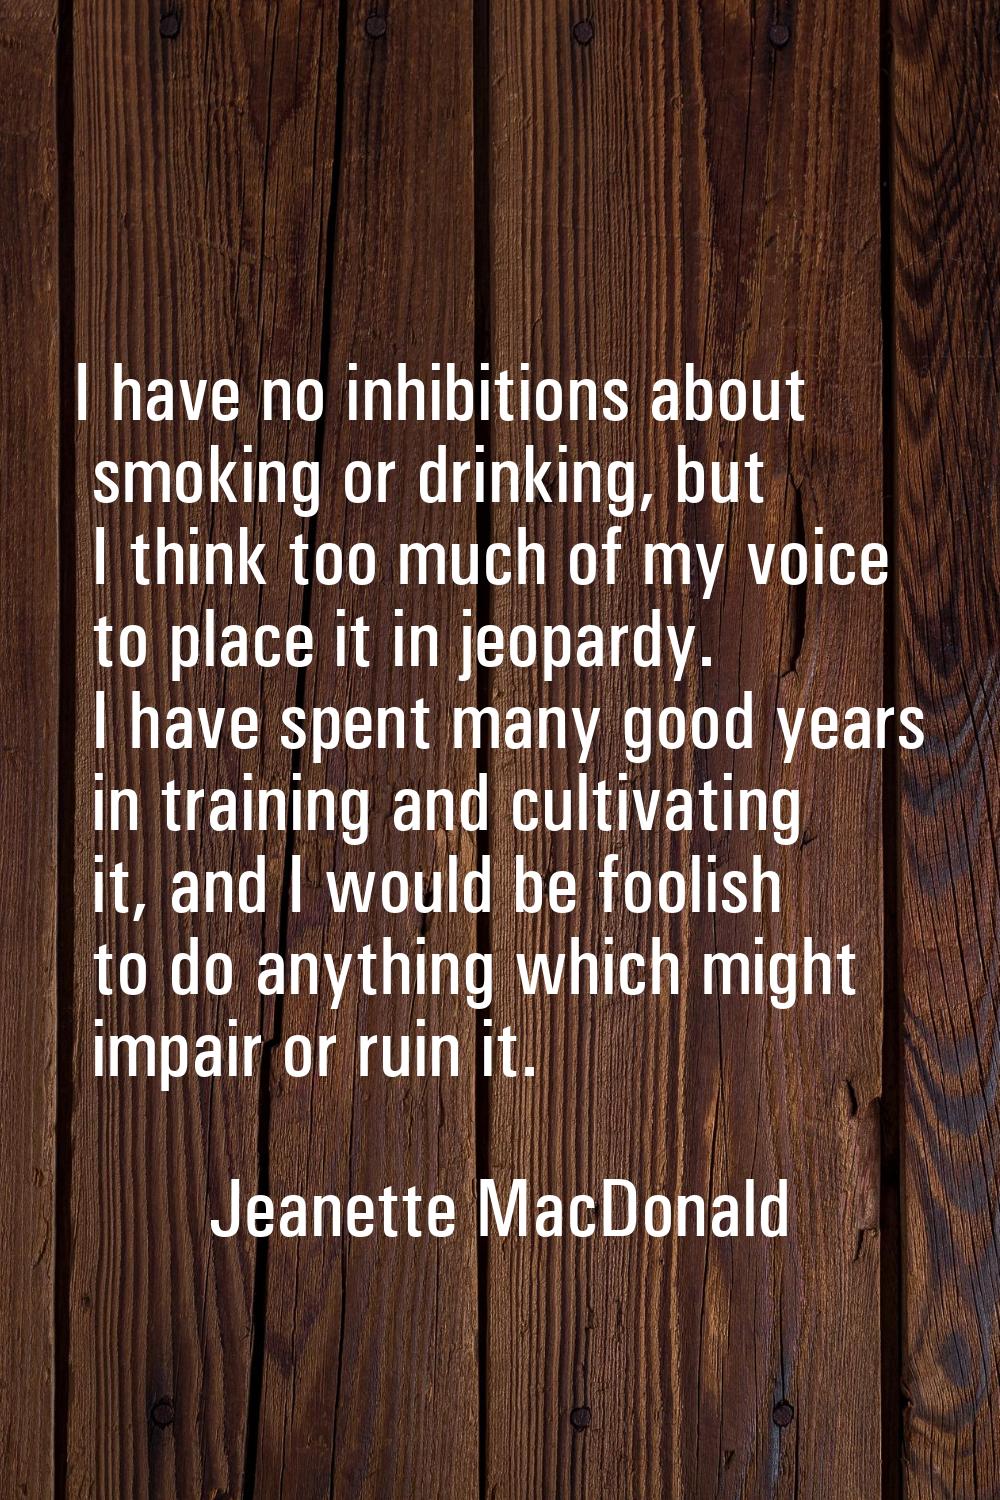 I have no inhibitions about smoking or drinking, but I think too much of my voice to place it in je